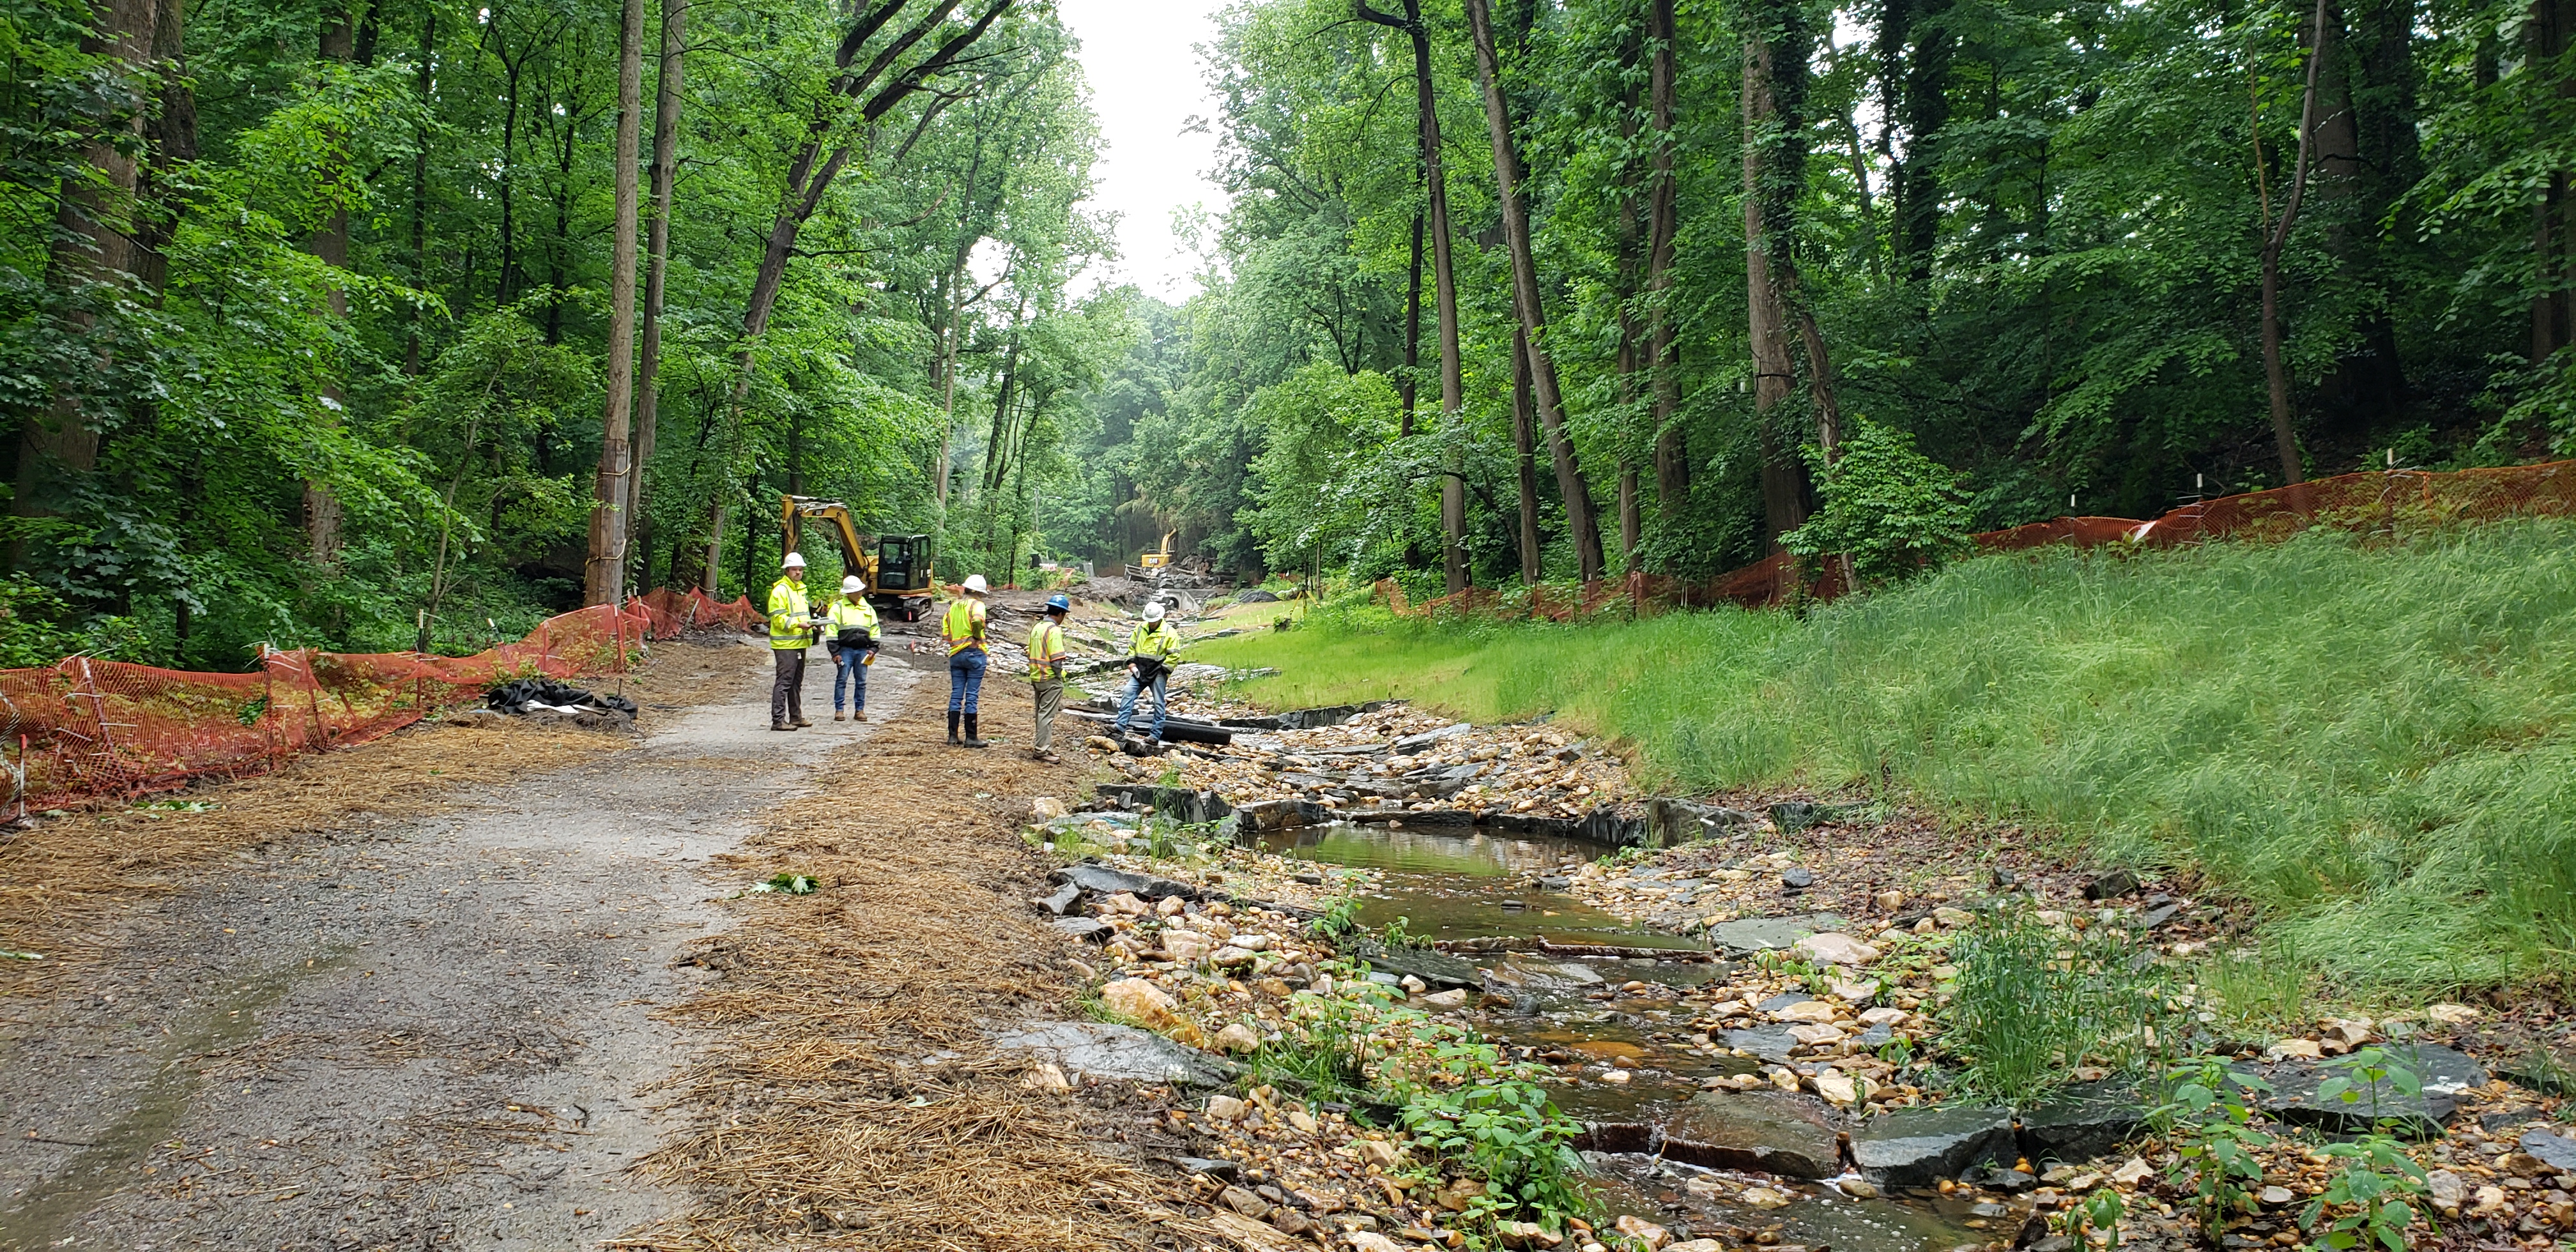 The Arlington County Government began construction on a stream resilience project in 2021. Here, the project manager, design engineer, construction manager, and contractor evaluate progress. Photo by Jason Papacosma